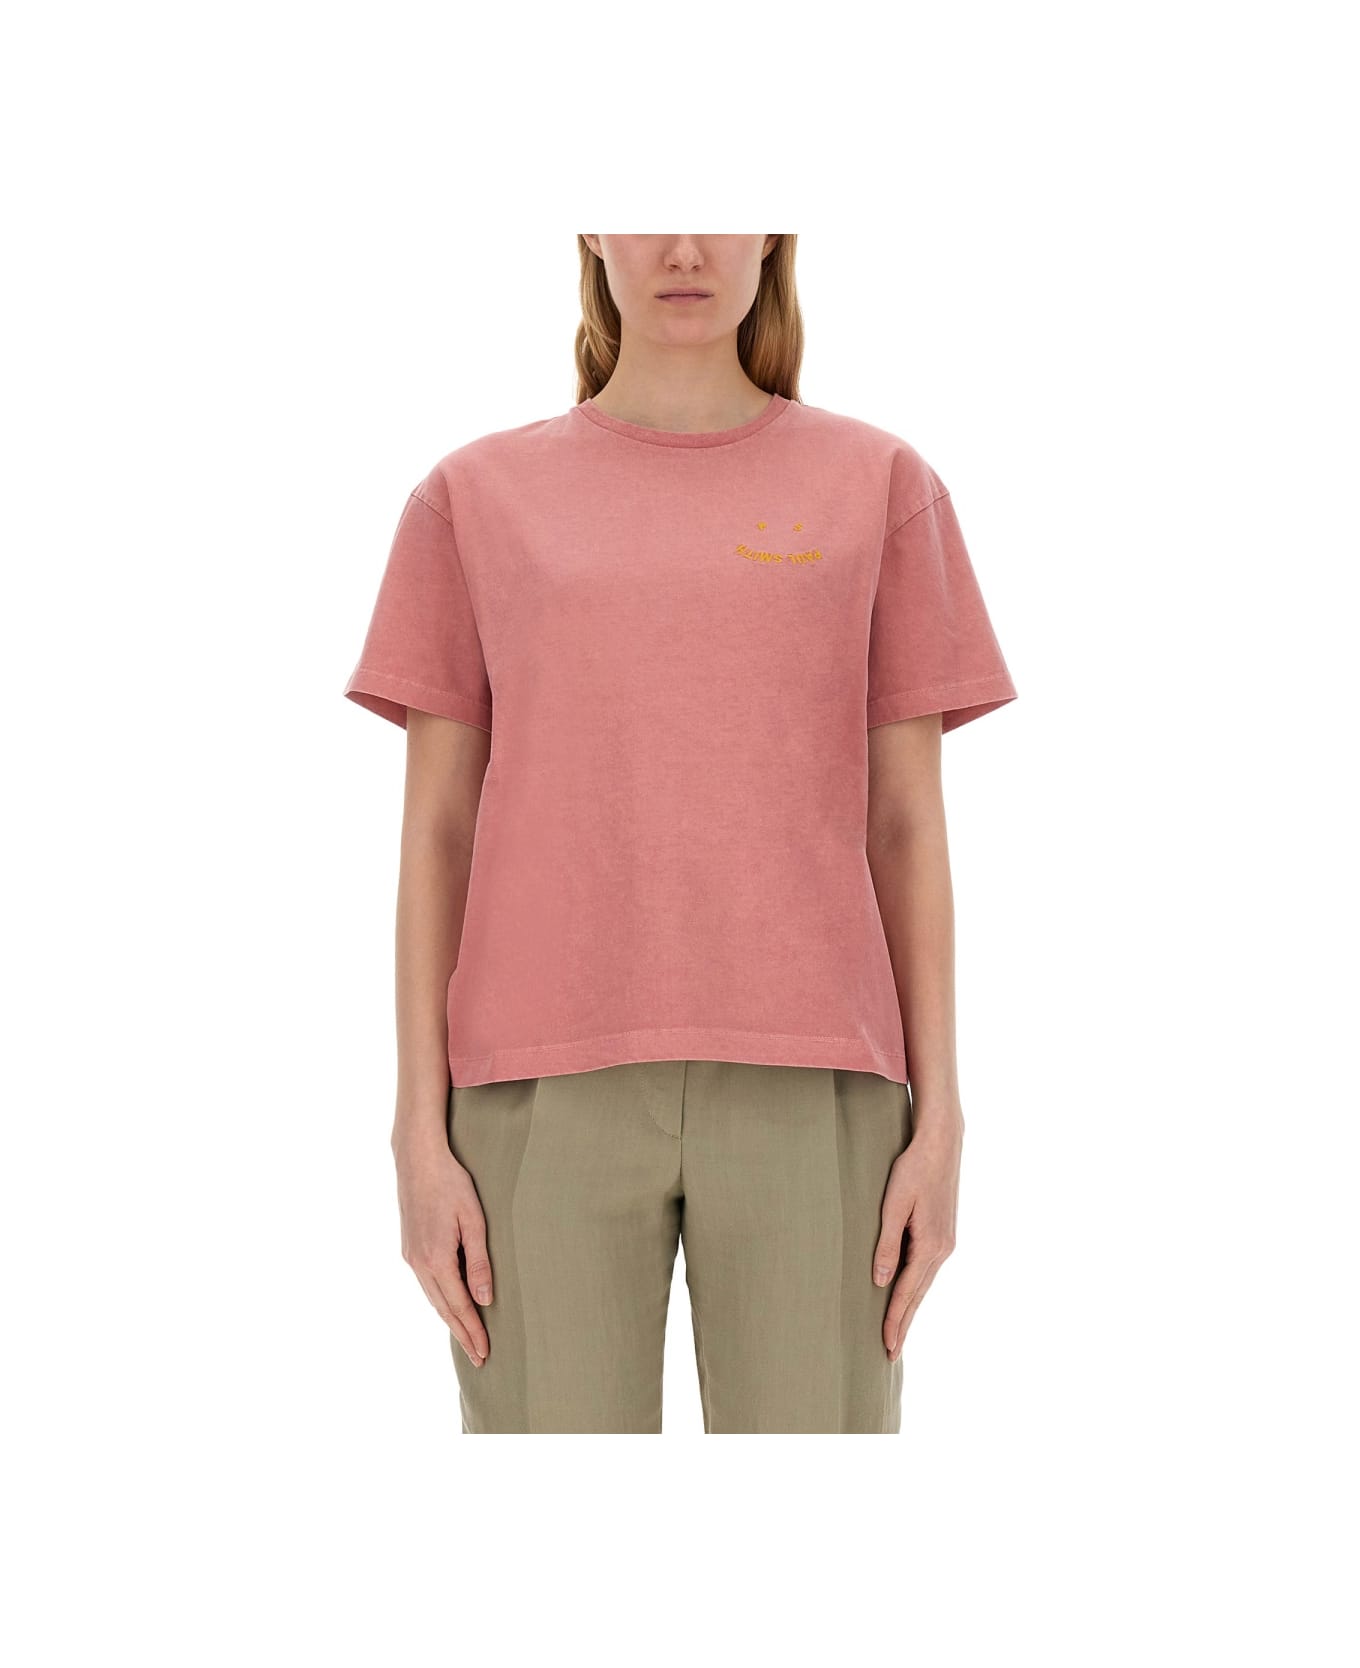 PS by Paul Smith T-shirt With "happy" Print - PINK